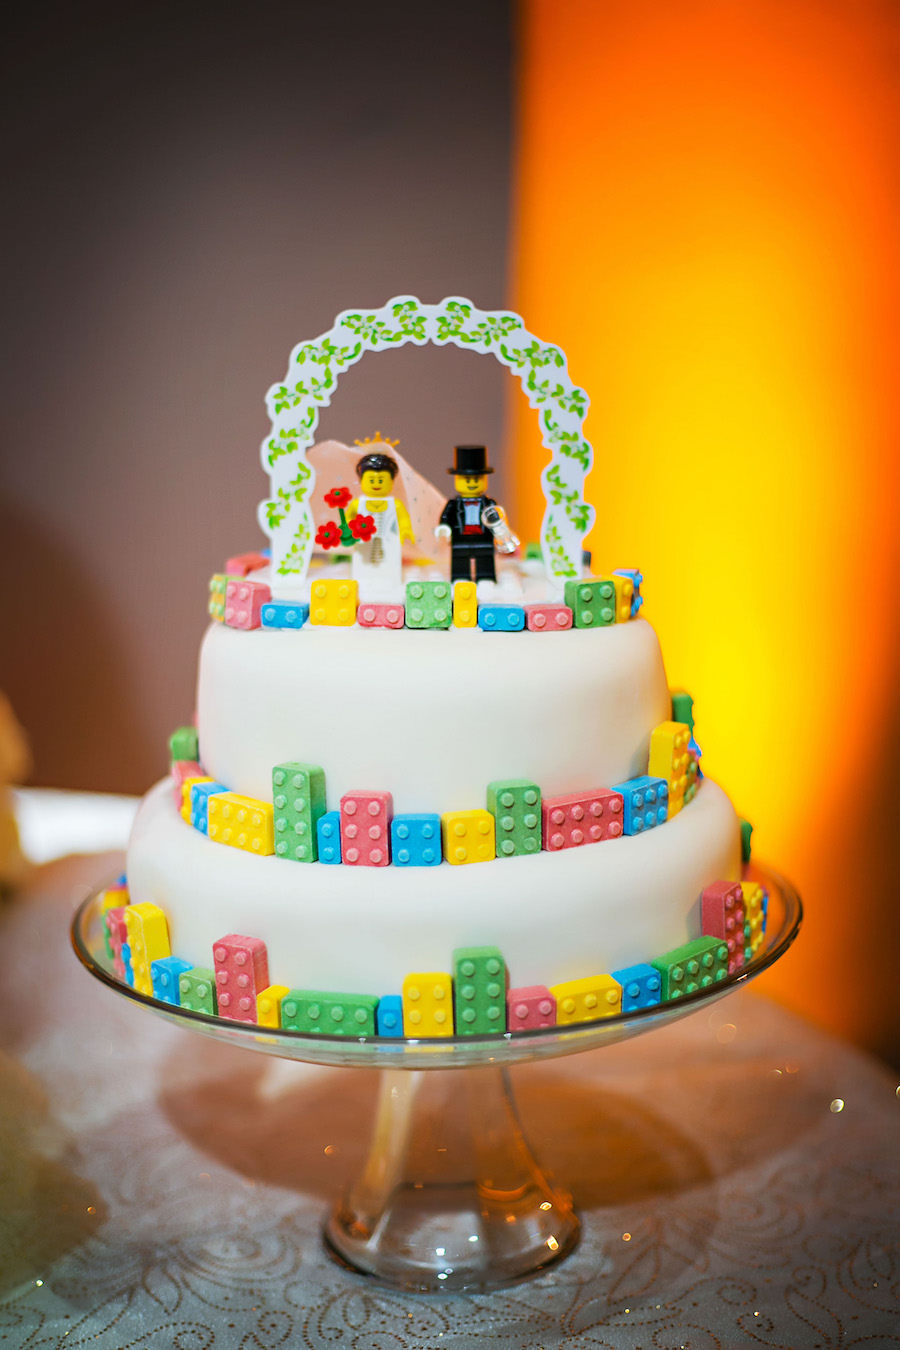 Two Tiered, Round White Lego Inspired Wedding Cake with Lego Bride and Groom Caketopper